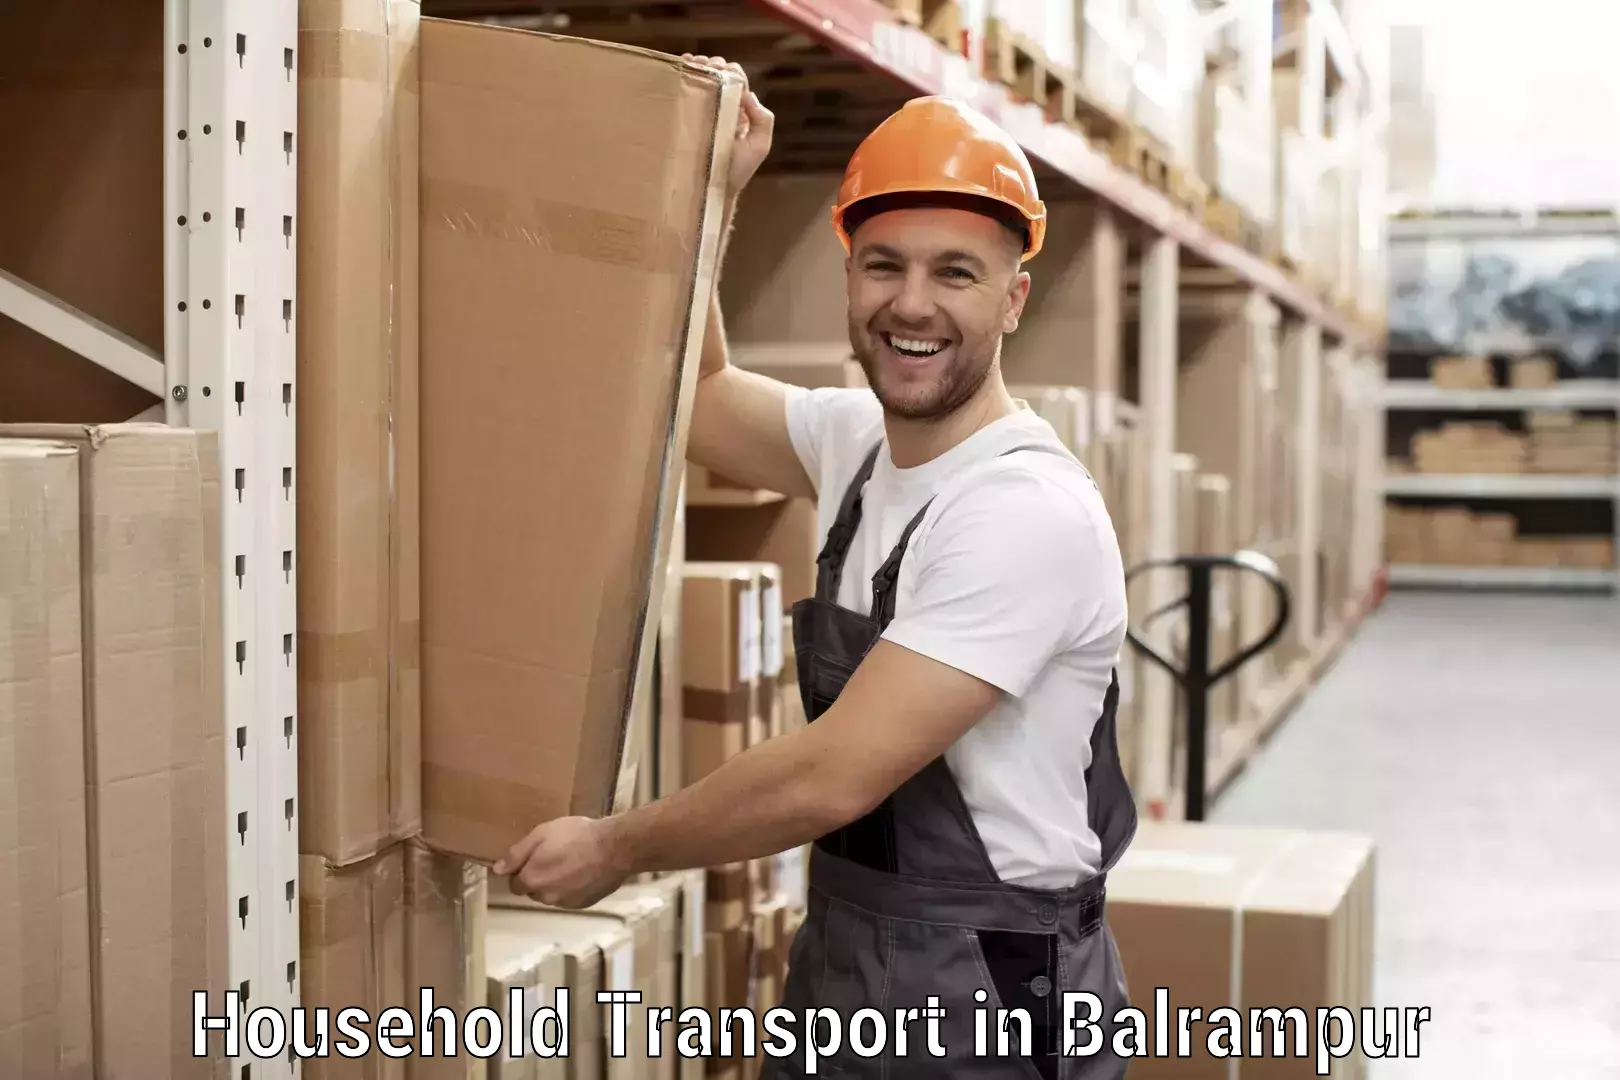 Quality relocation assistance in Balrampur